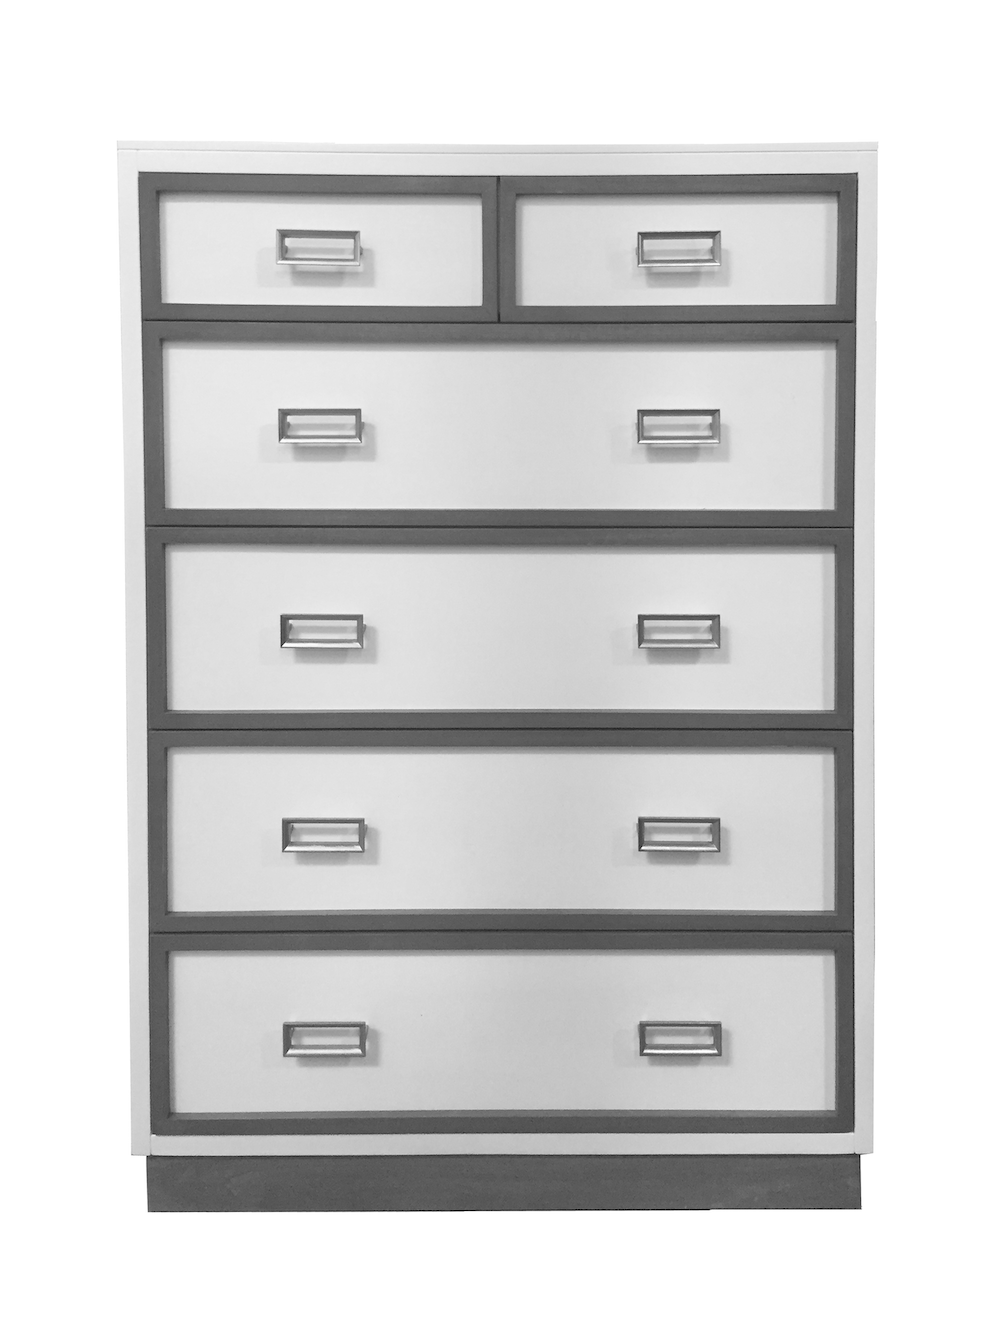 Max 6 Drawer Chest - Twinkle Twinkle Little One